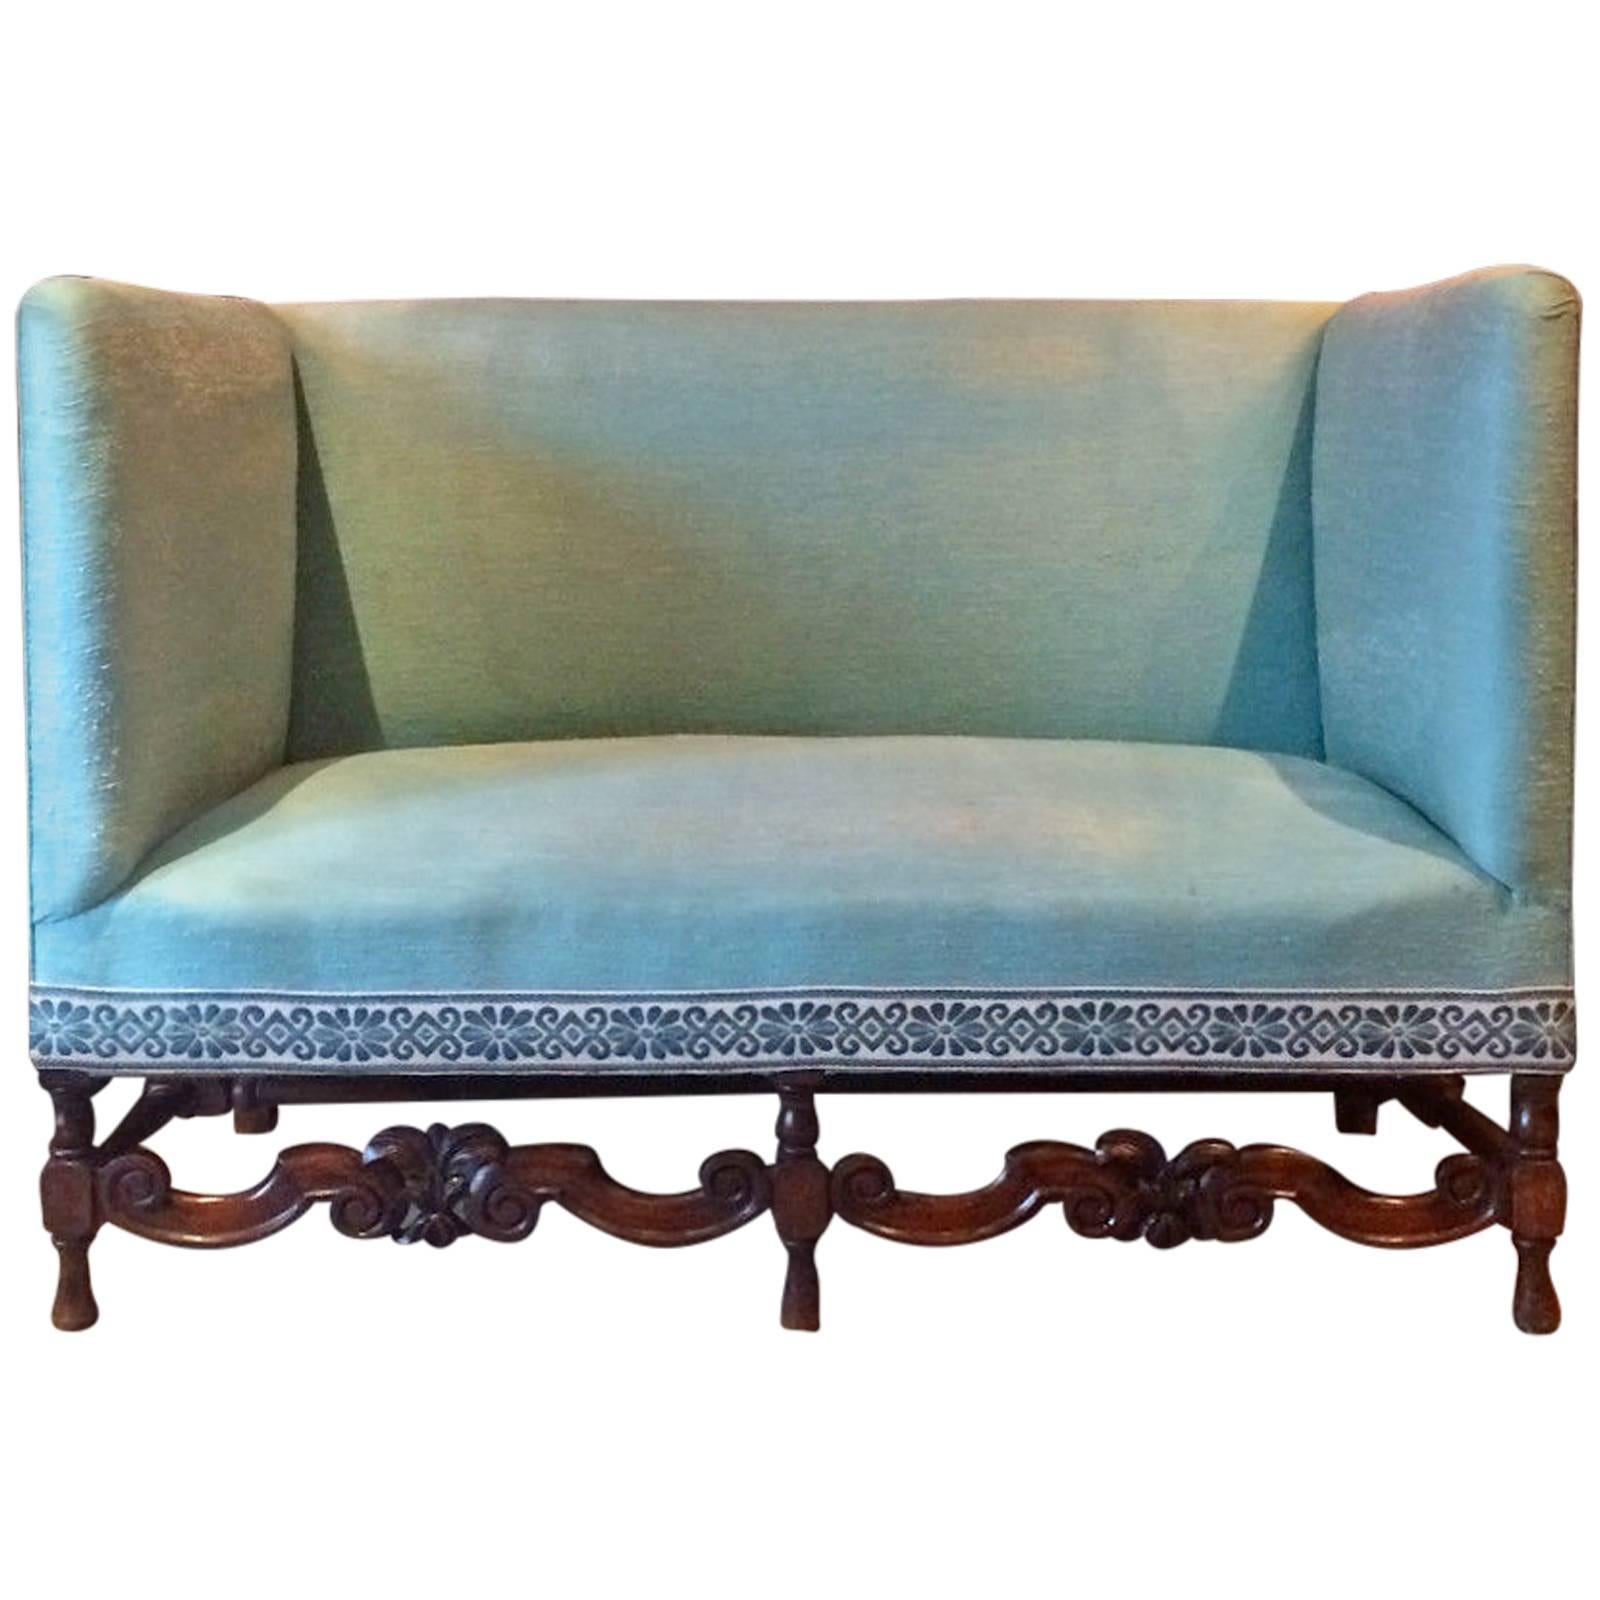 Antique Sofa Shabby Chic Queen Anne Style Victorian High Back Settee